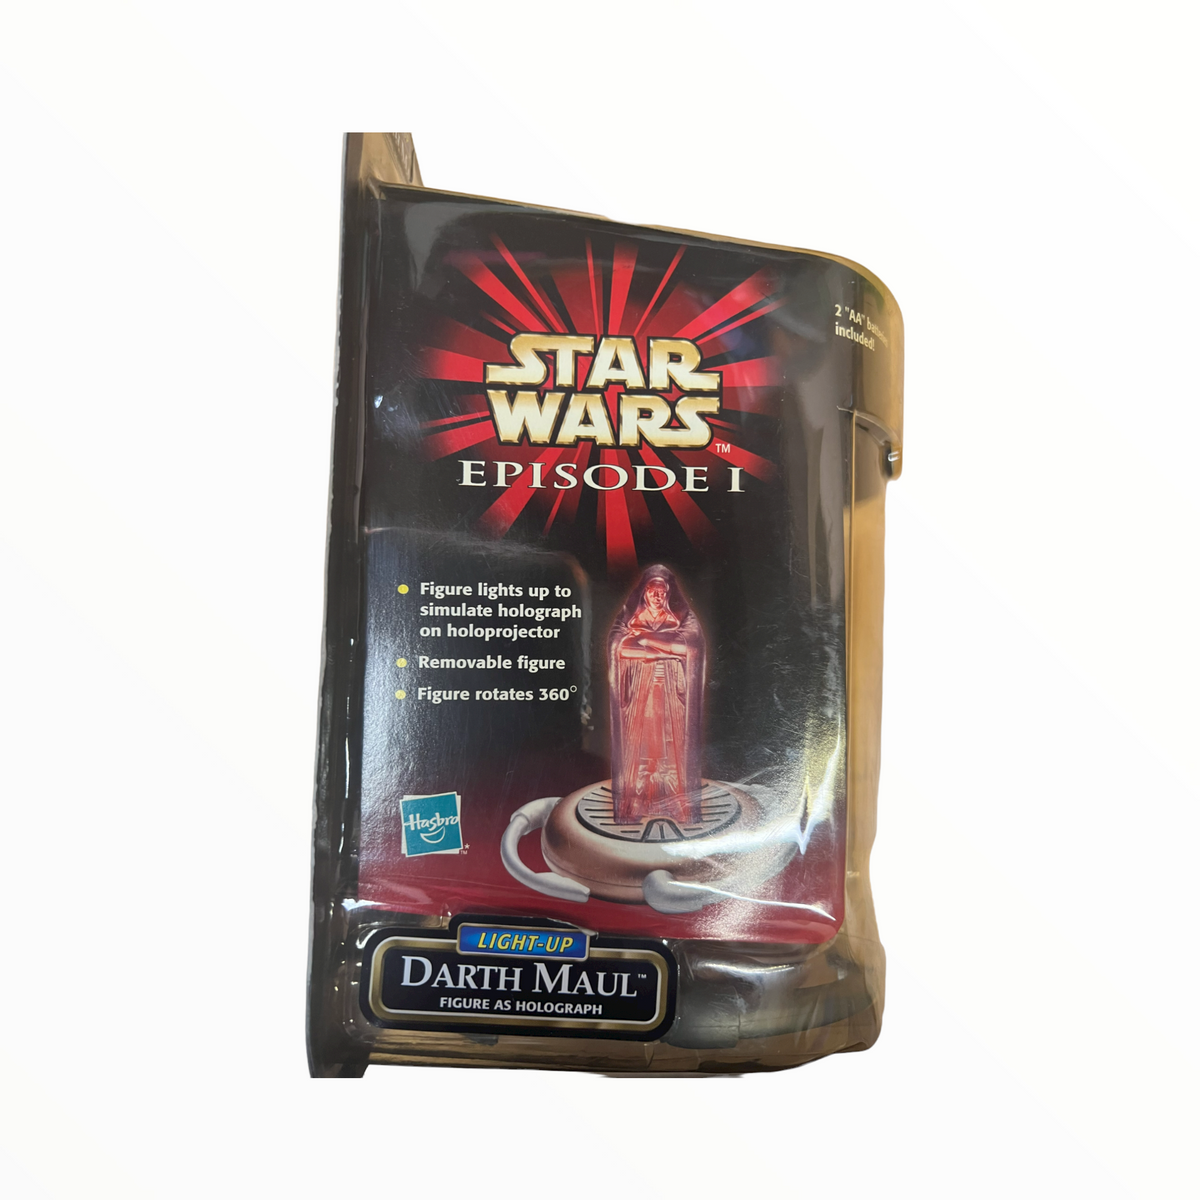 Star Wars Episode 1 Deluxe Holographic Light-Up Darth Maul Action Figure